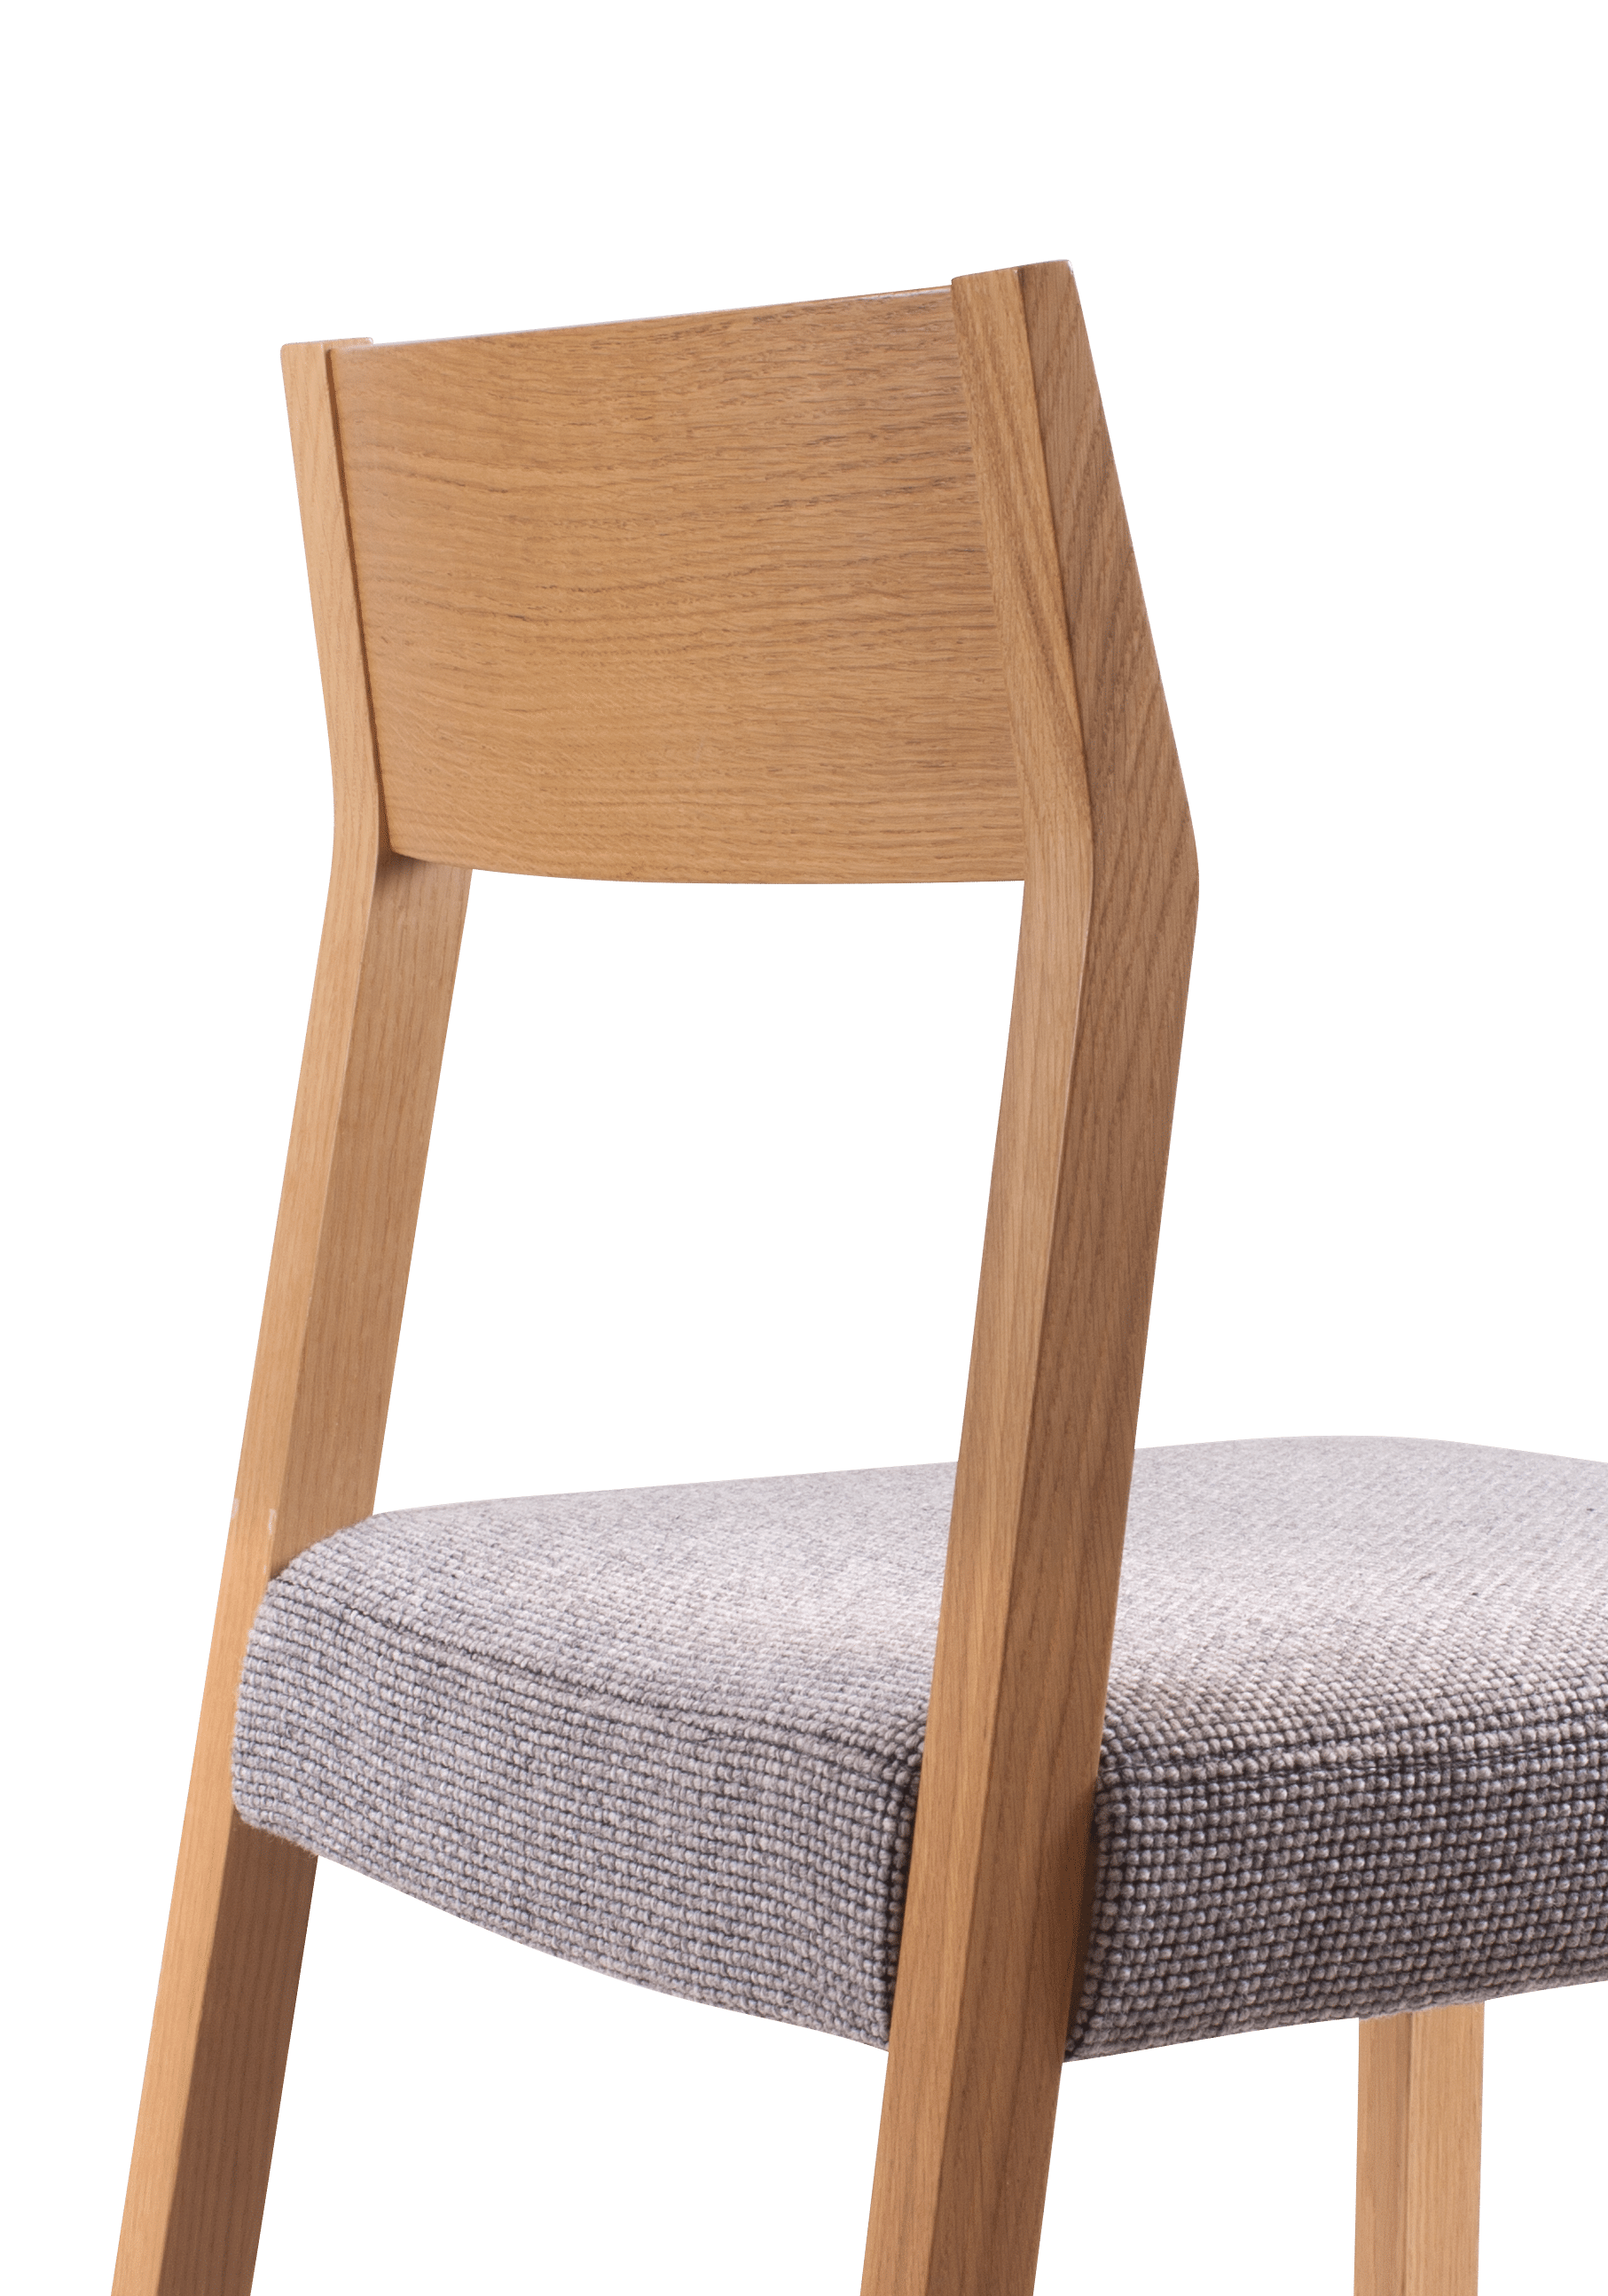 CH Linea Chair clear grey uphol detail